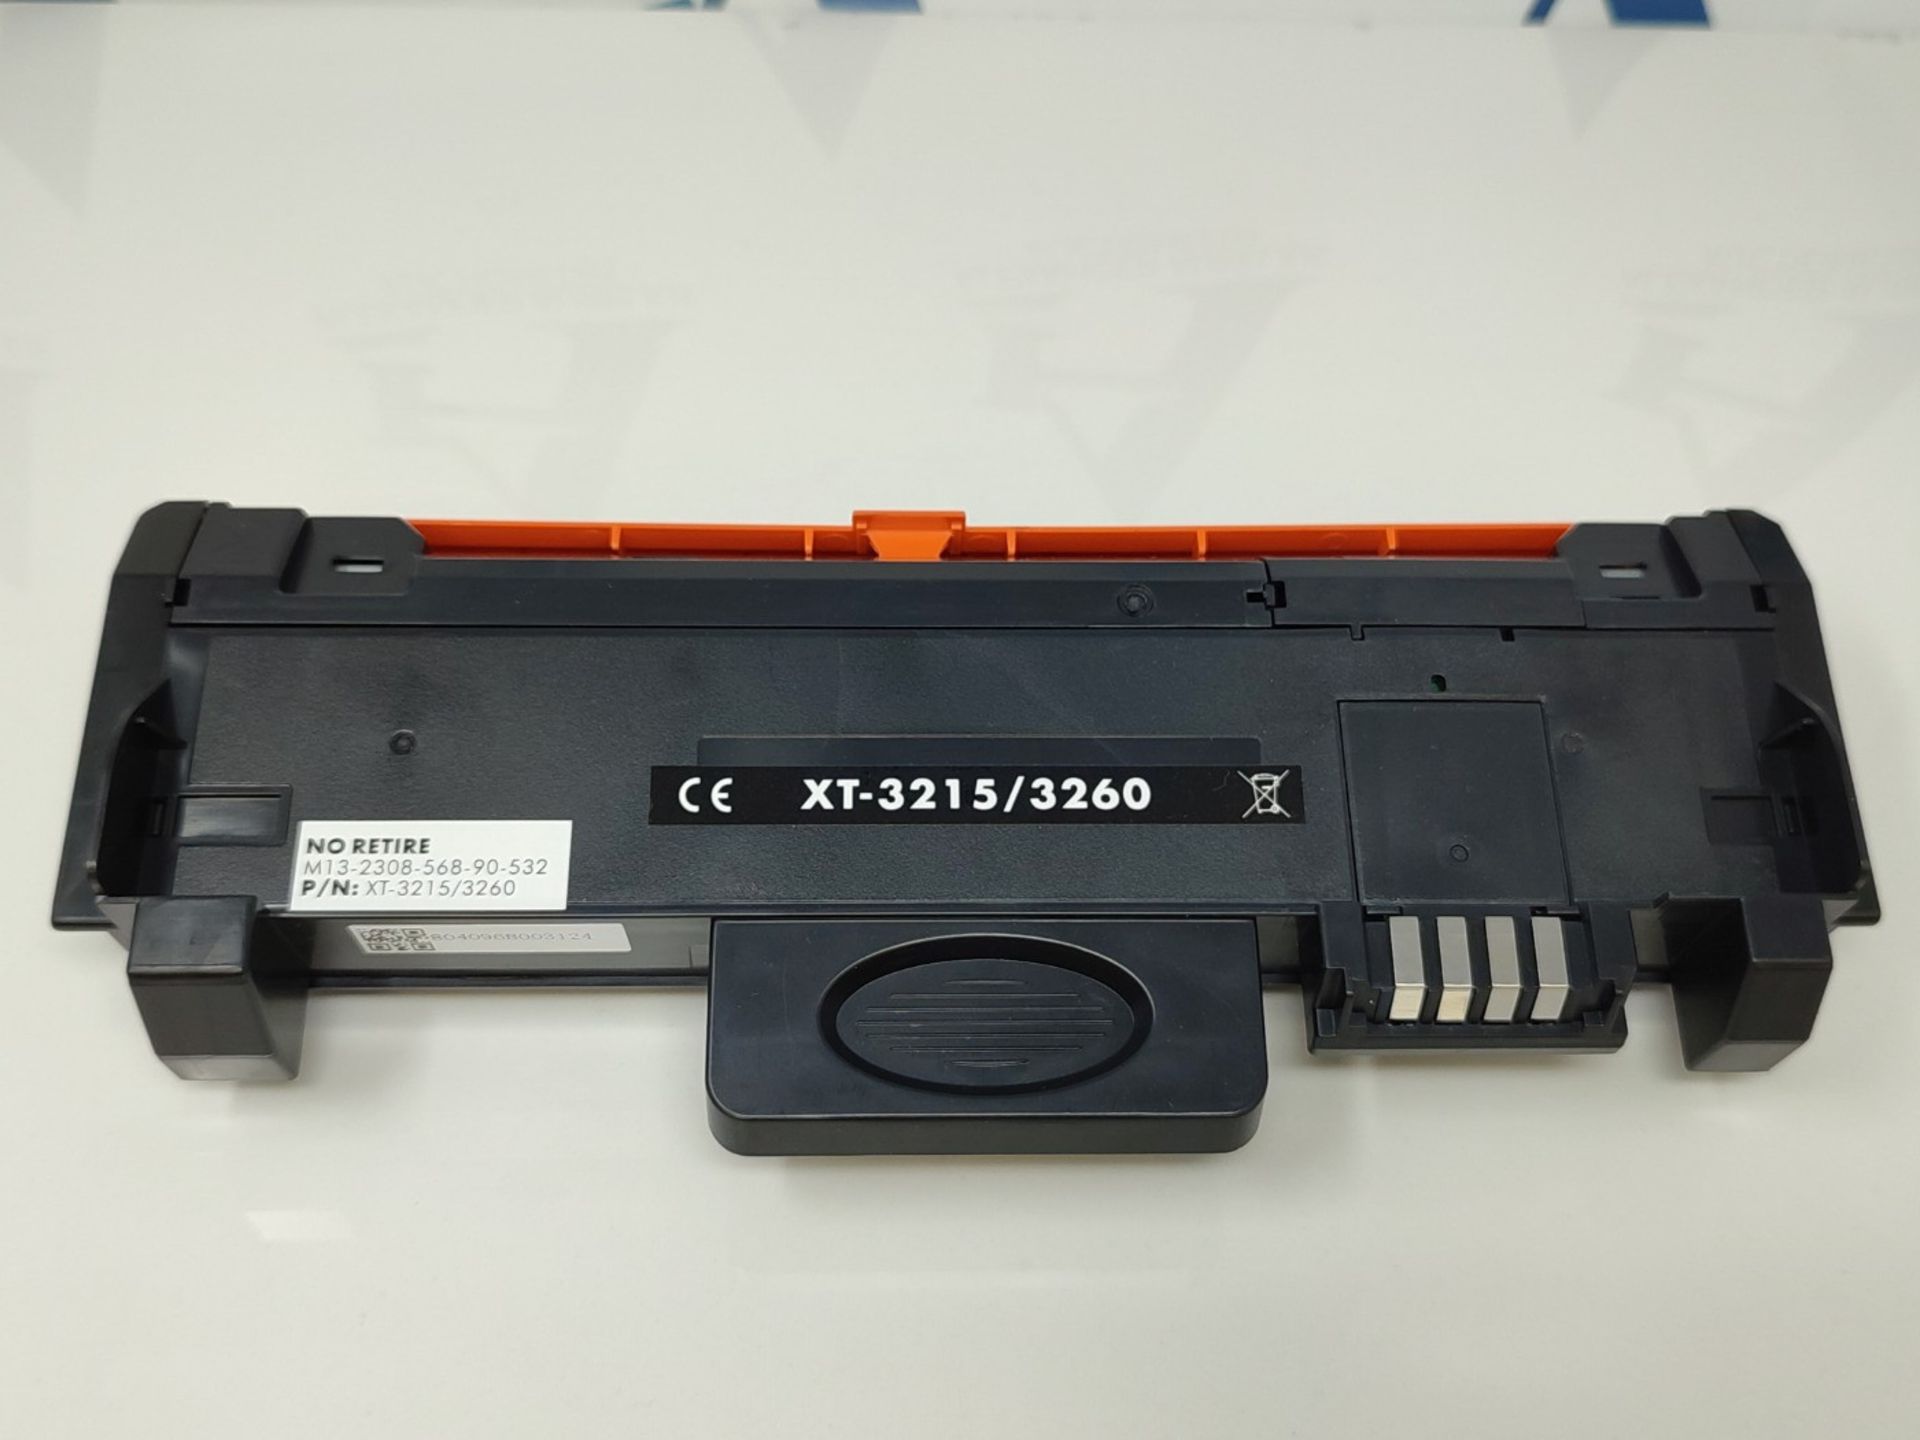 universo cartridge® 106R02777 Compatible Toner Cartridge for Xerox Phaser 3052, 3260, - Image 3 of 4